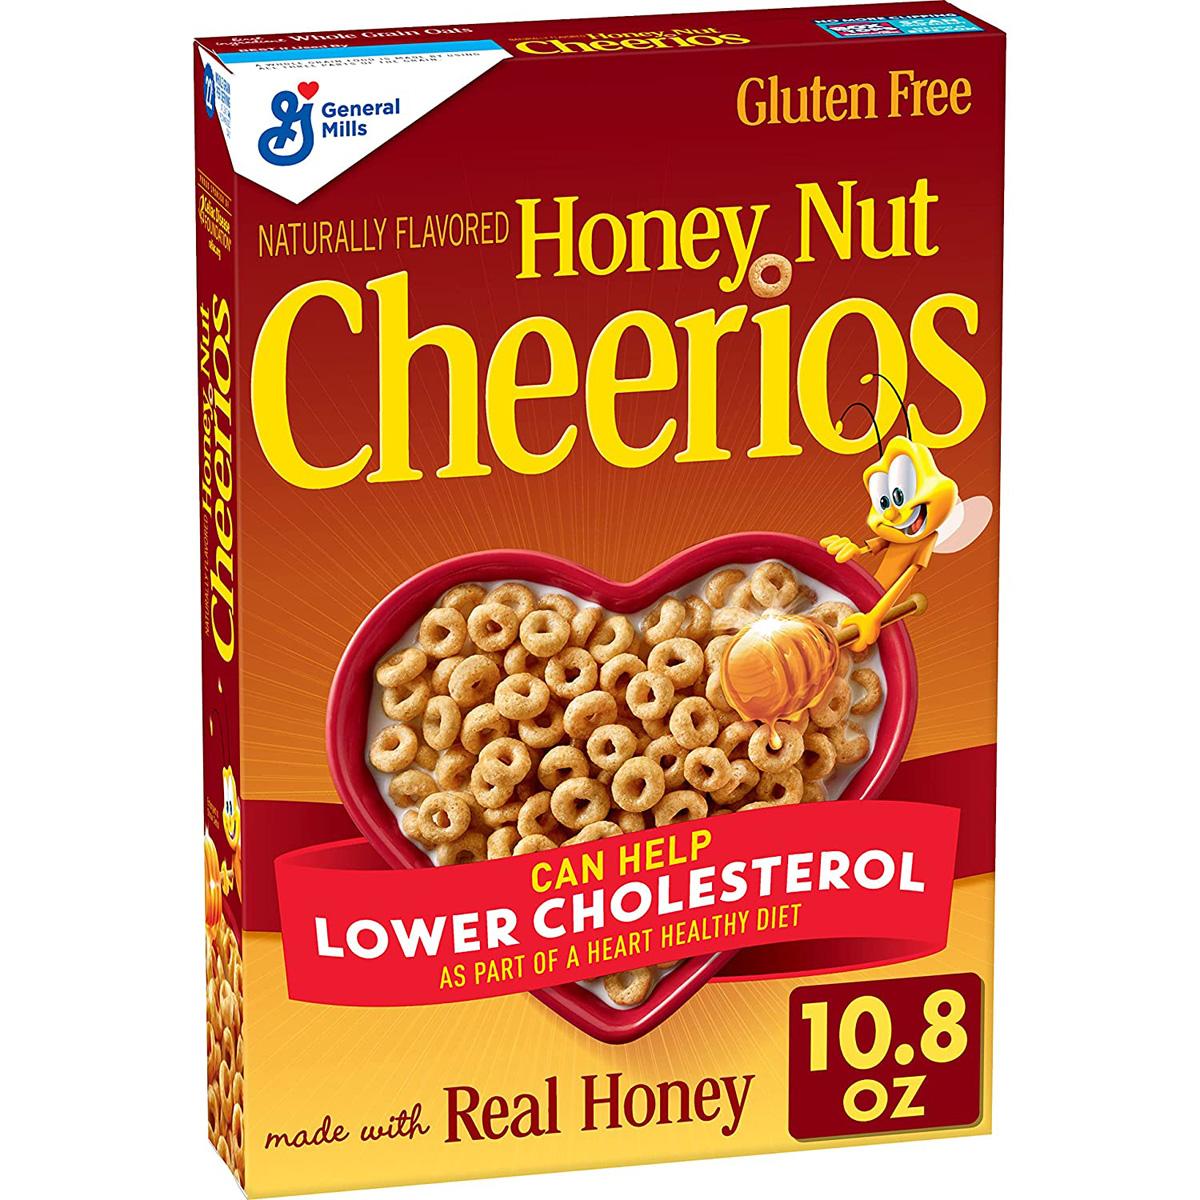 Honey Nut Cheerios Cereal for $1.79 Shipped